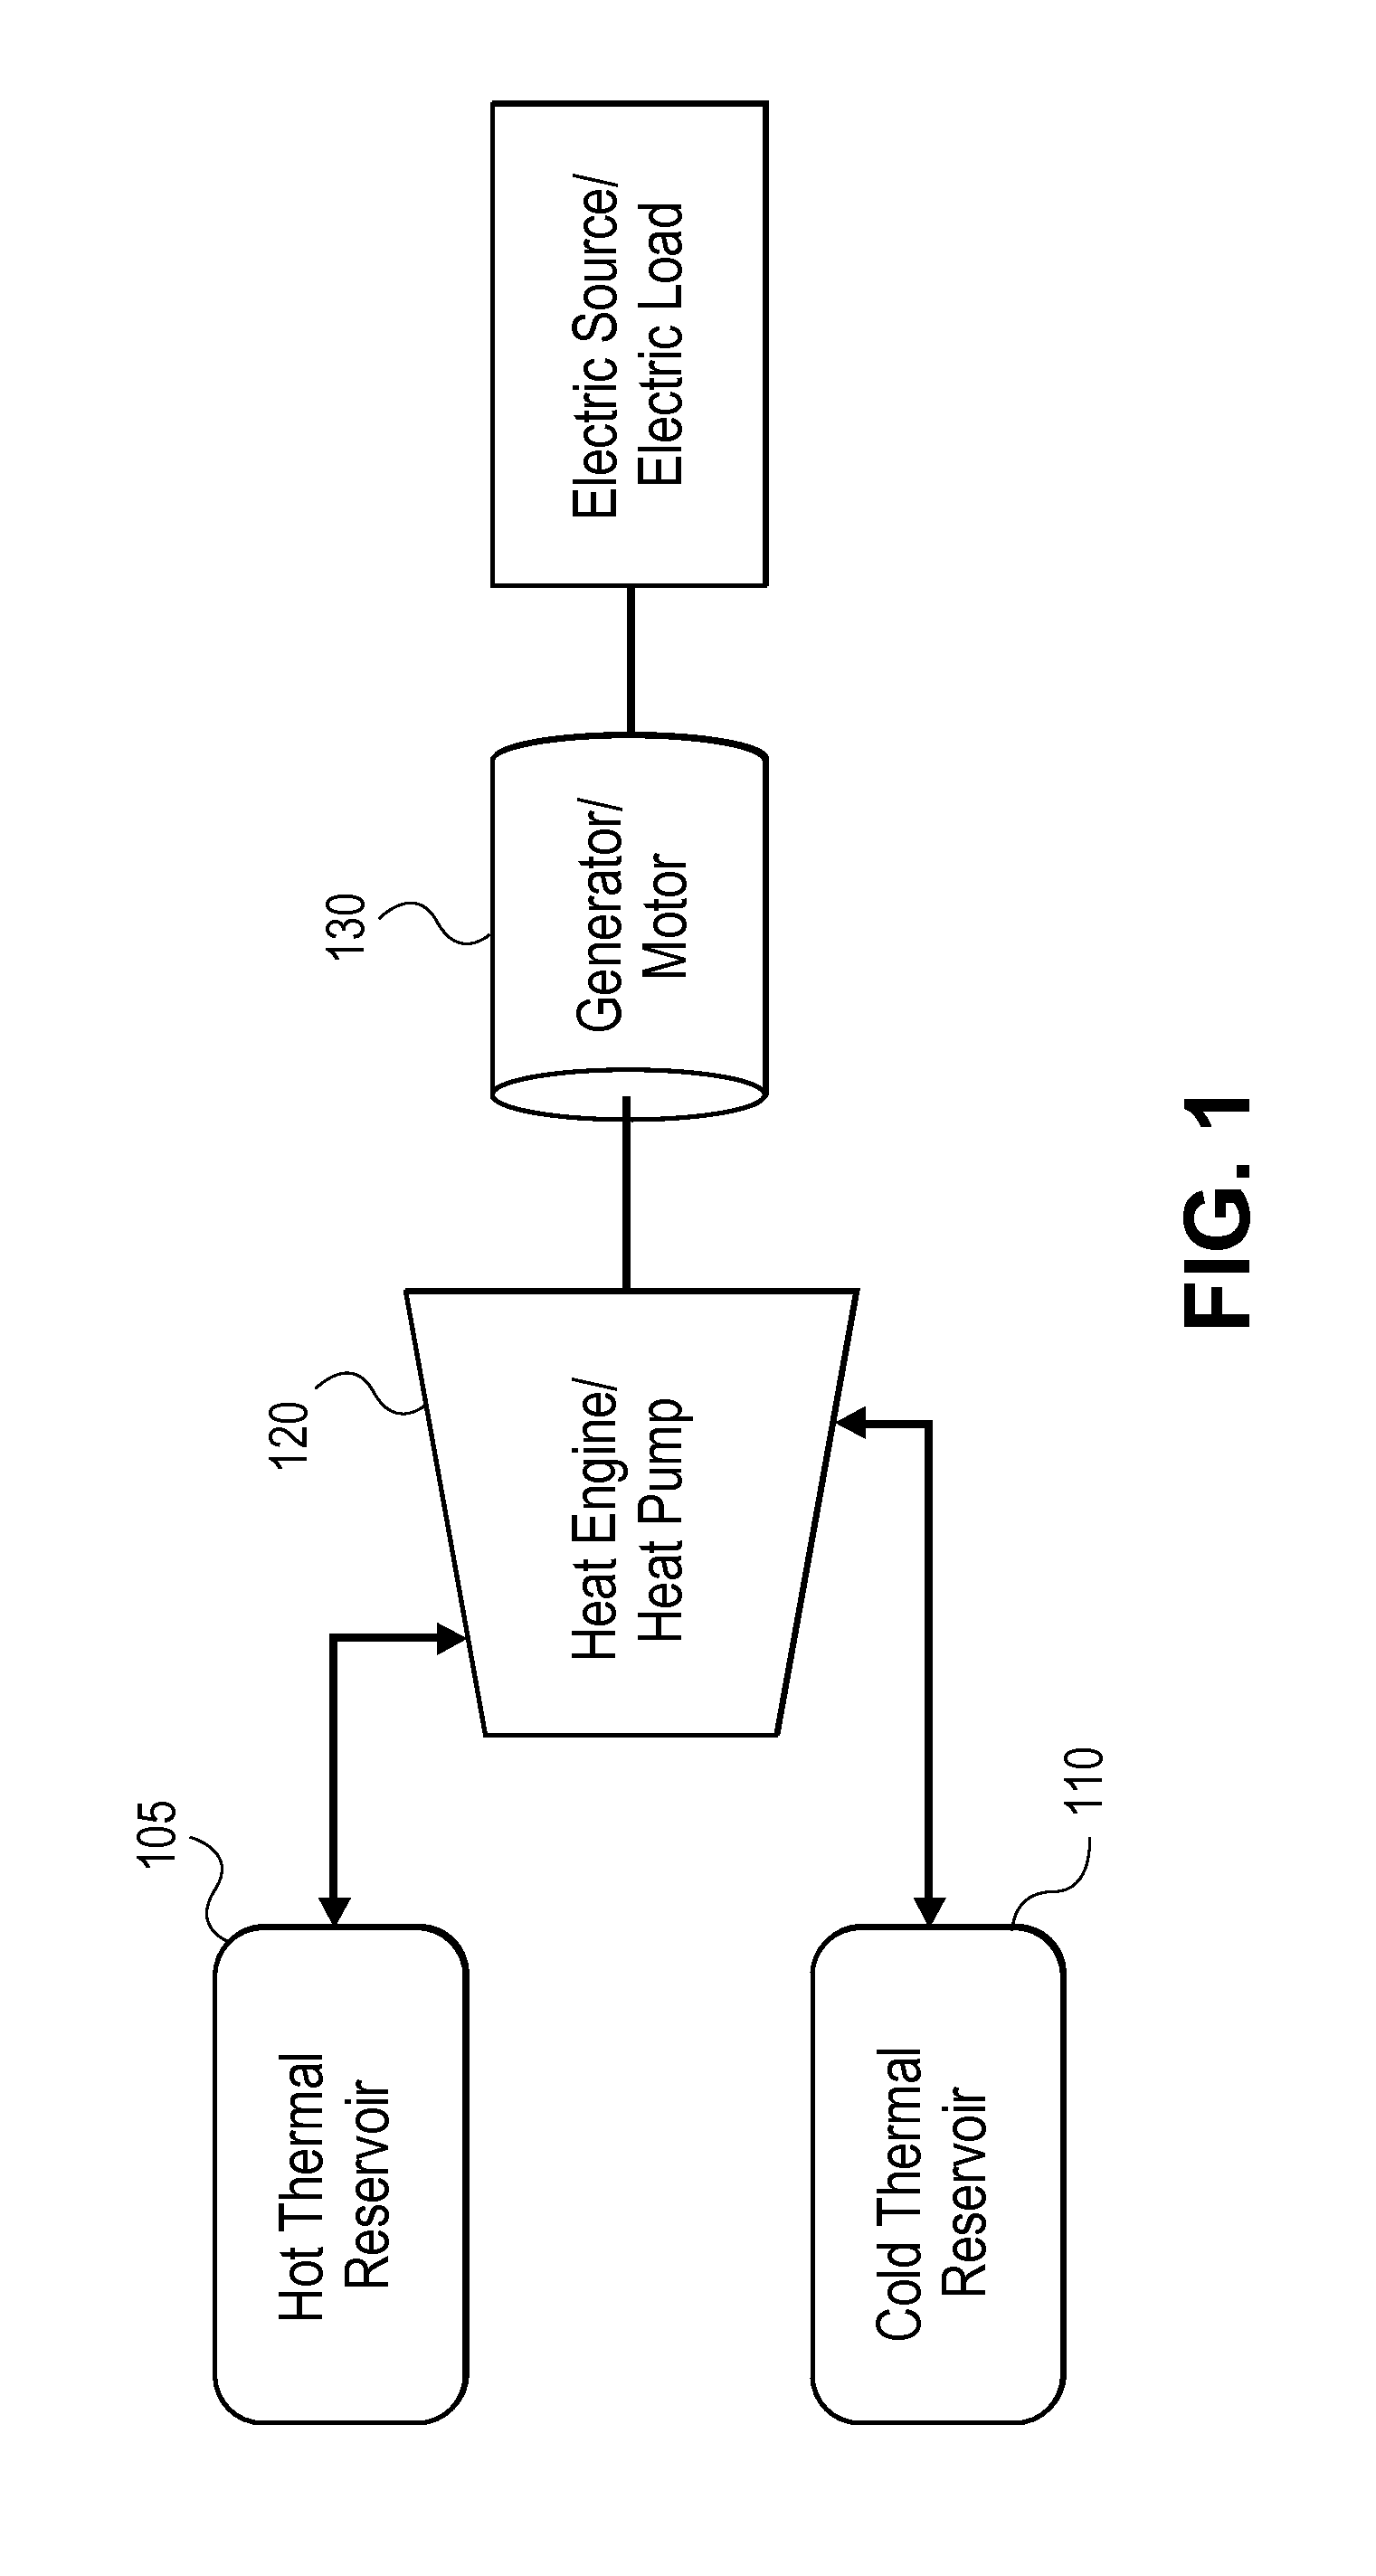 Thermal energy storage system